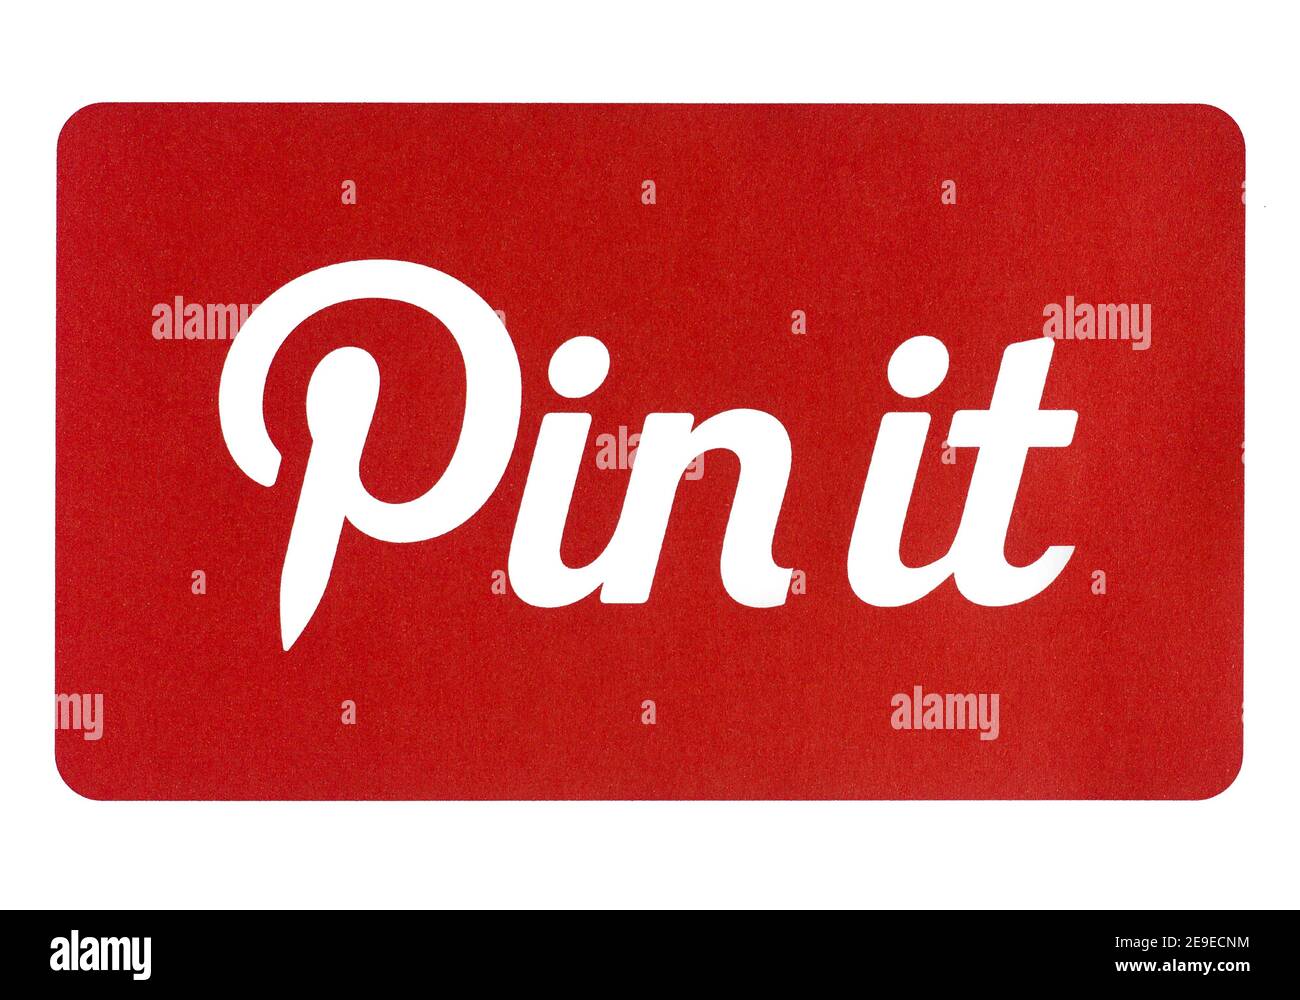 Photo of  Pinterest logo "pin it" printed on paper and placed on white background. Editorial Use Only Stock Photo